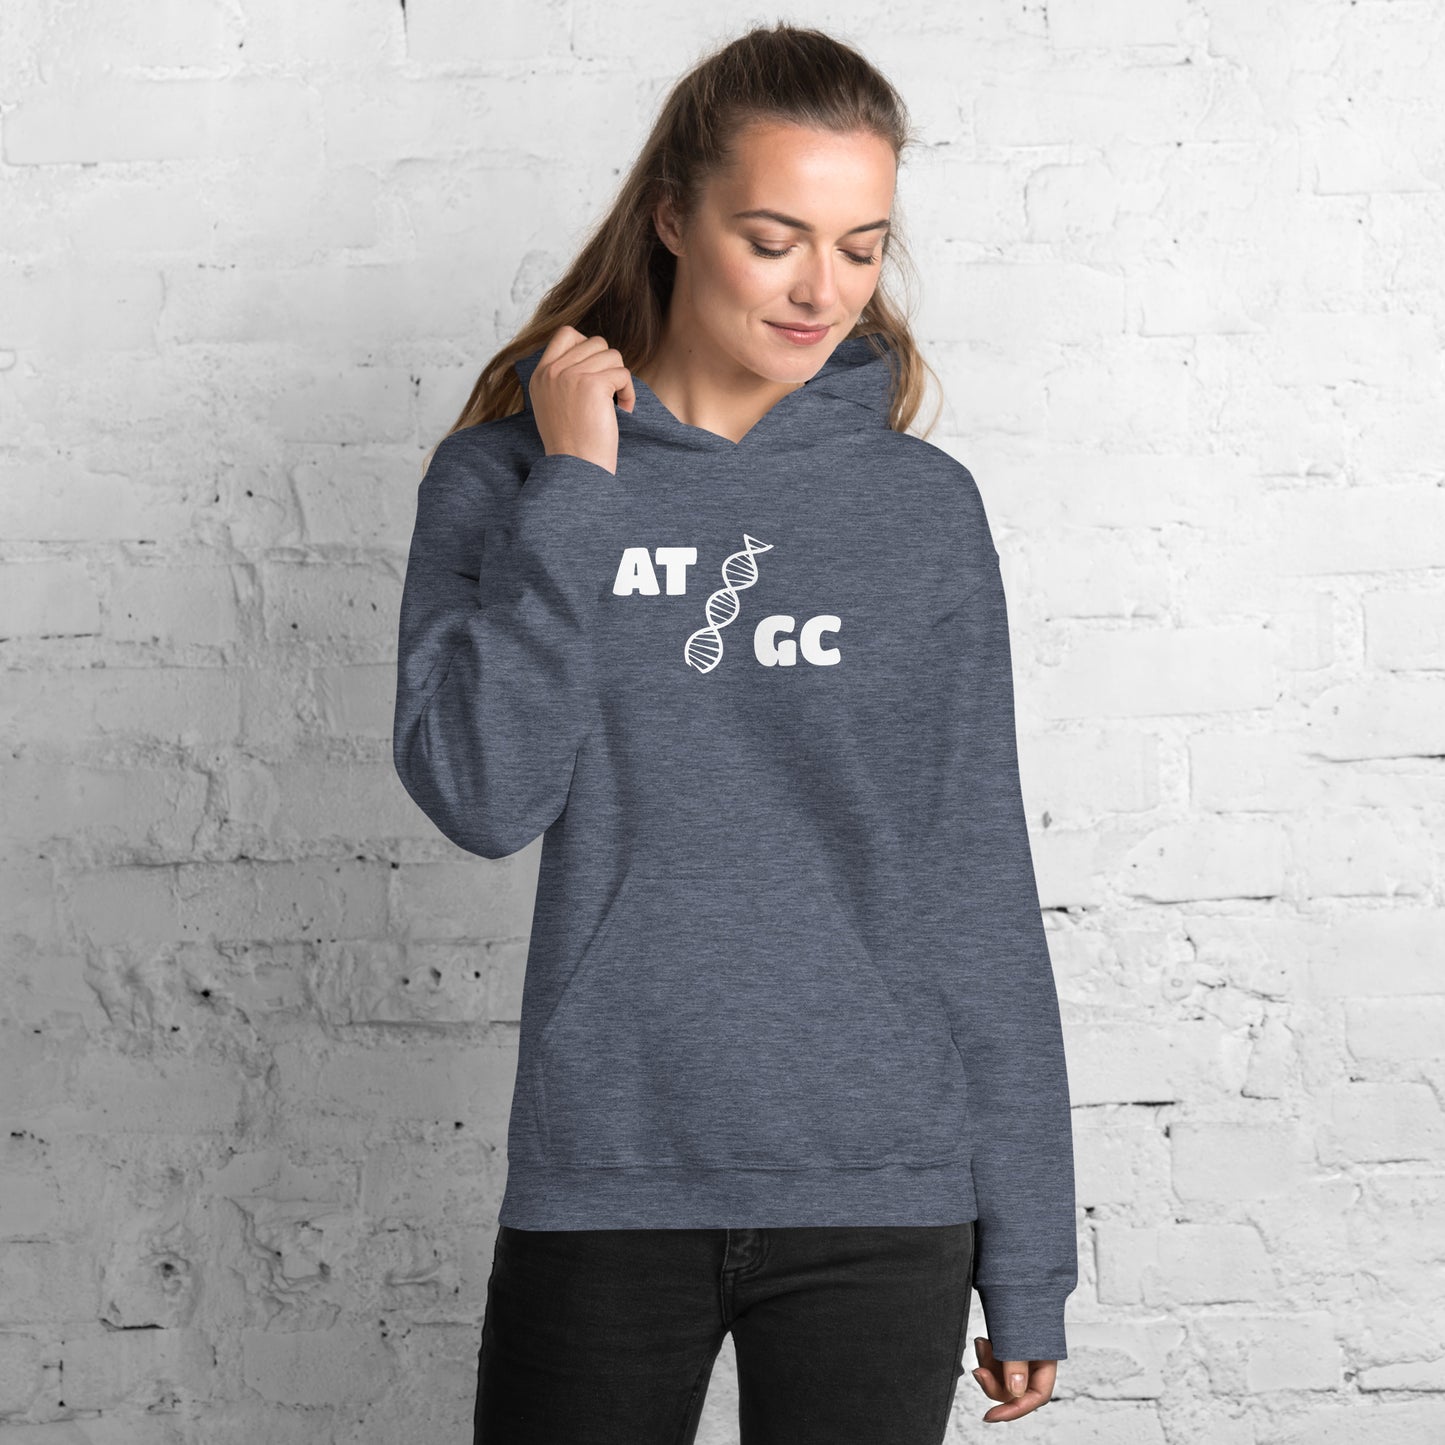 Women with dark navy blue hoodie with image of a DNA string and the text "ATGC"